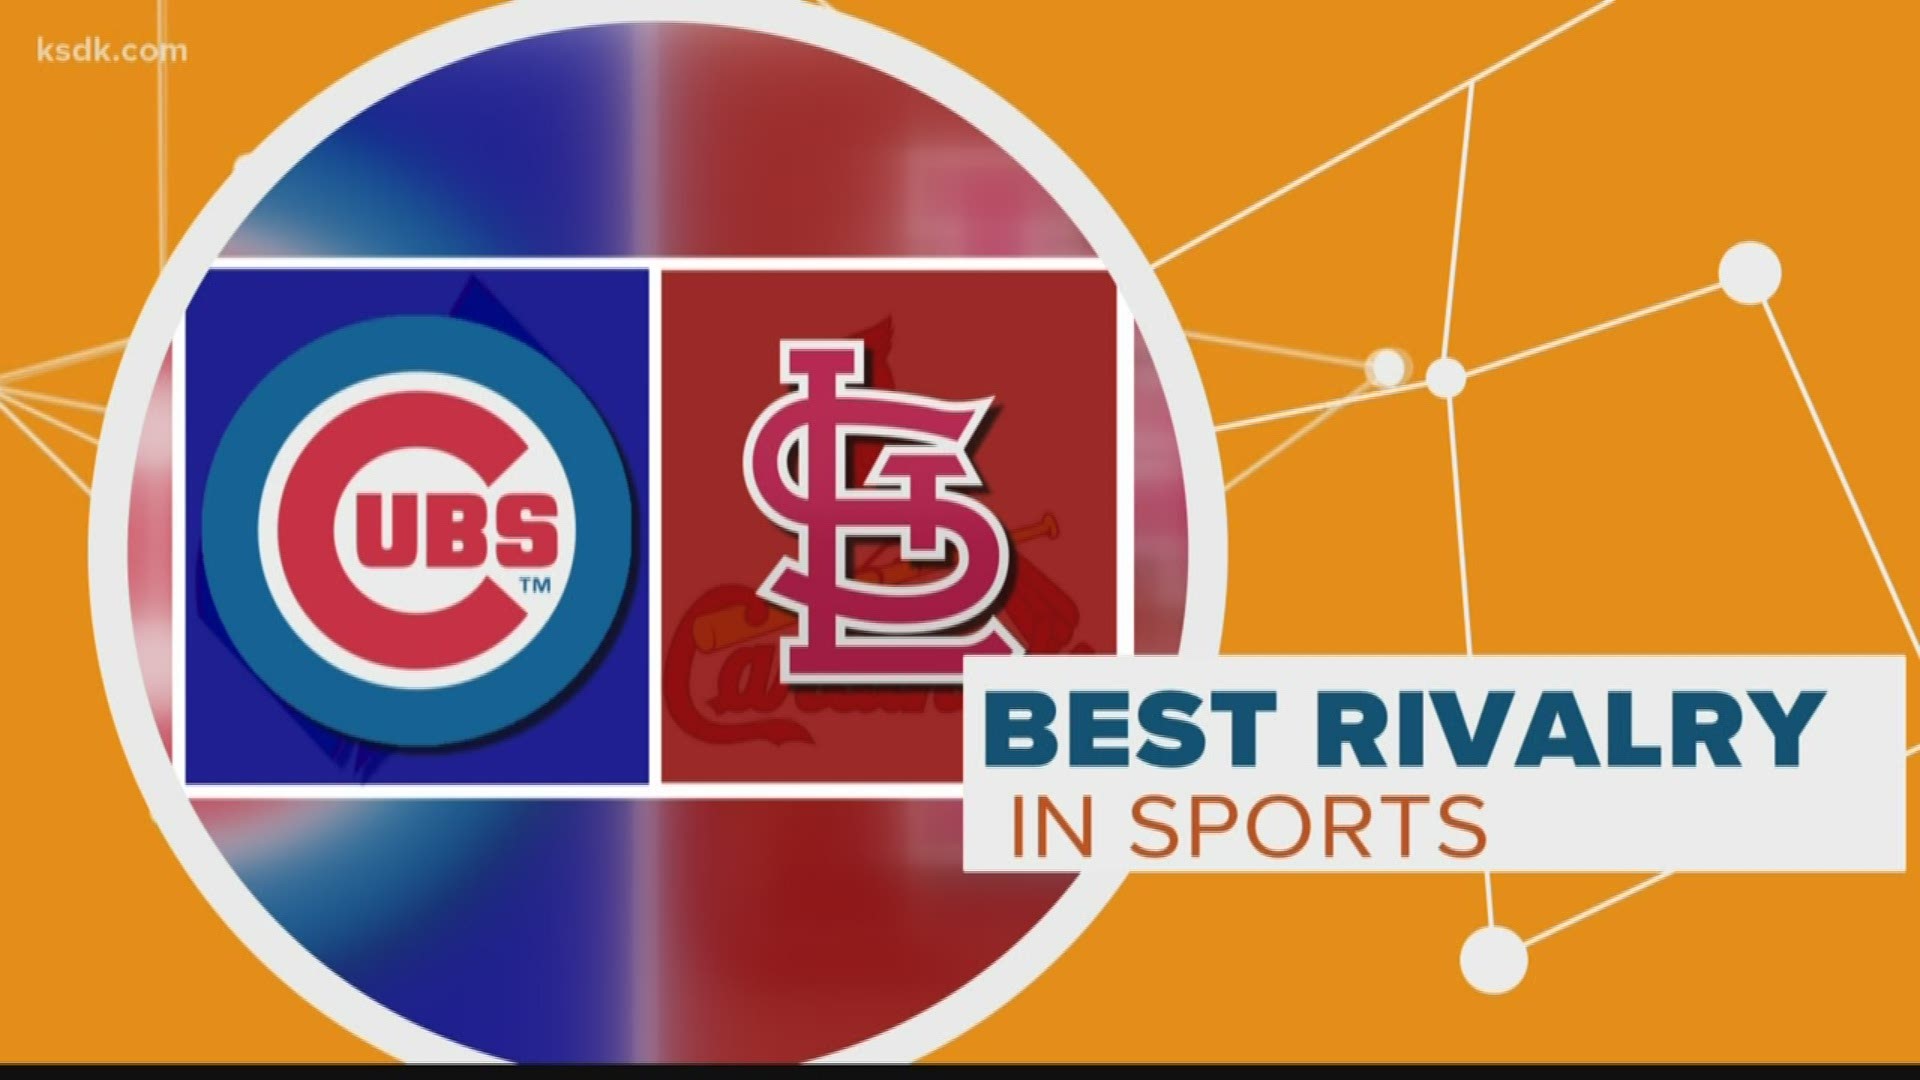 STL CARDINALS & Chicago Cubs RIVALRY